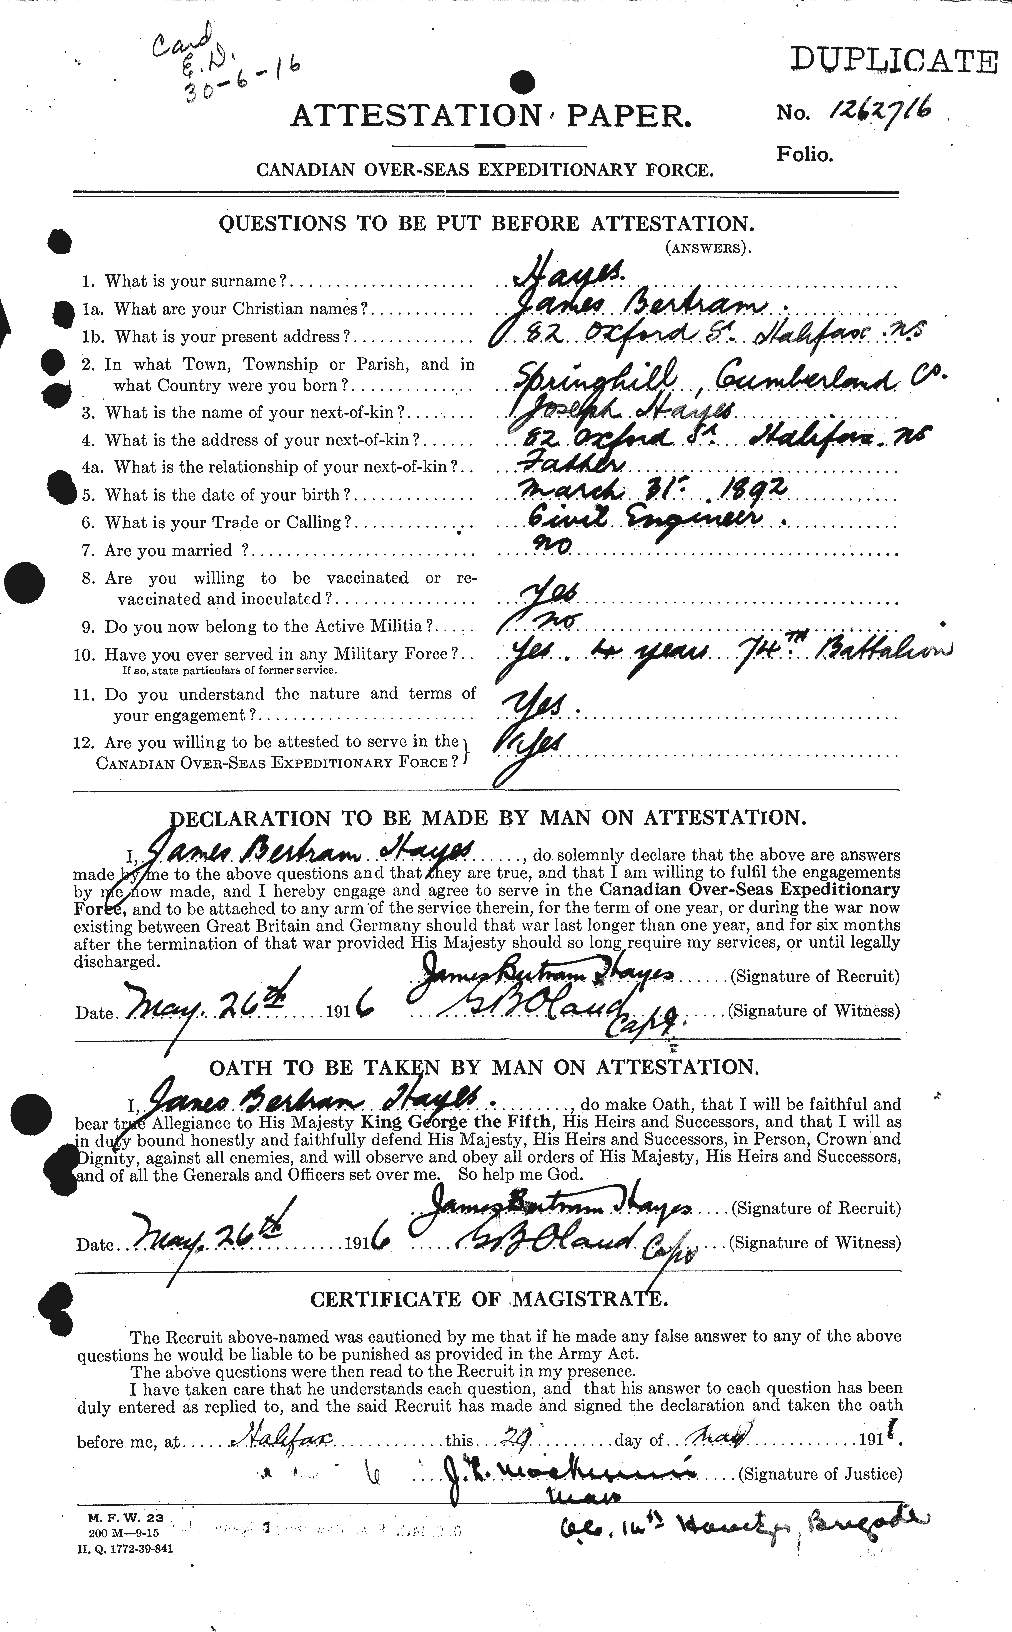 Personnel Records of the First World War - CEF 385538a